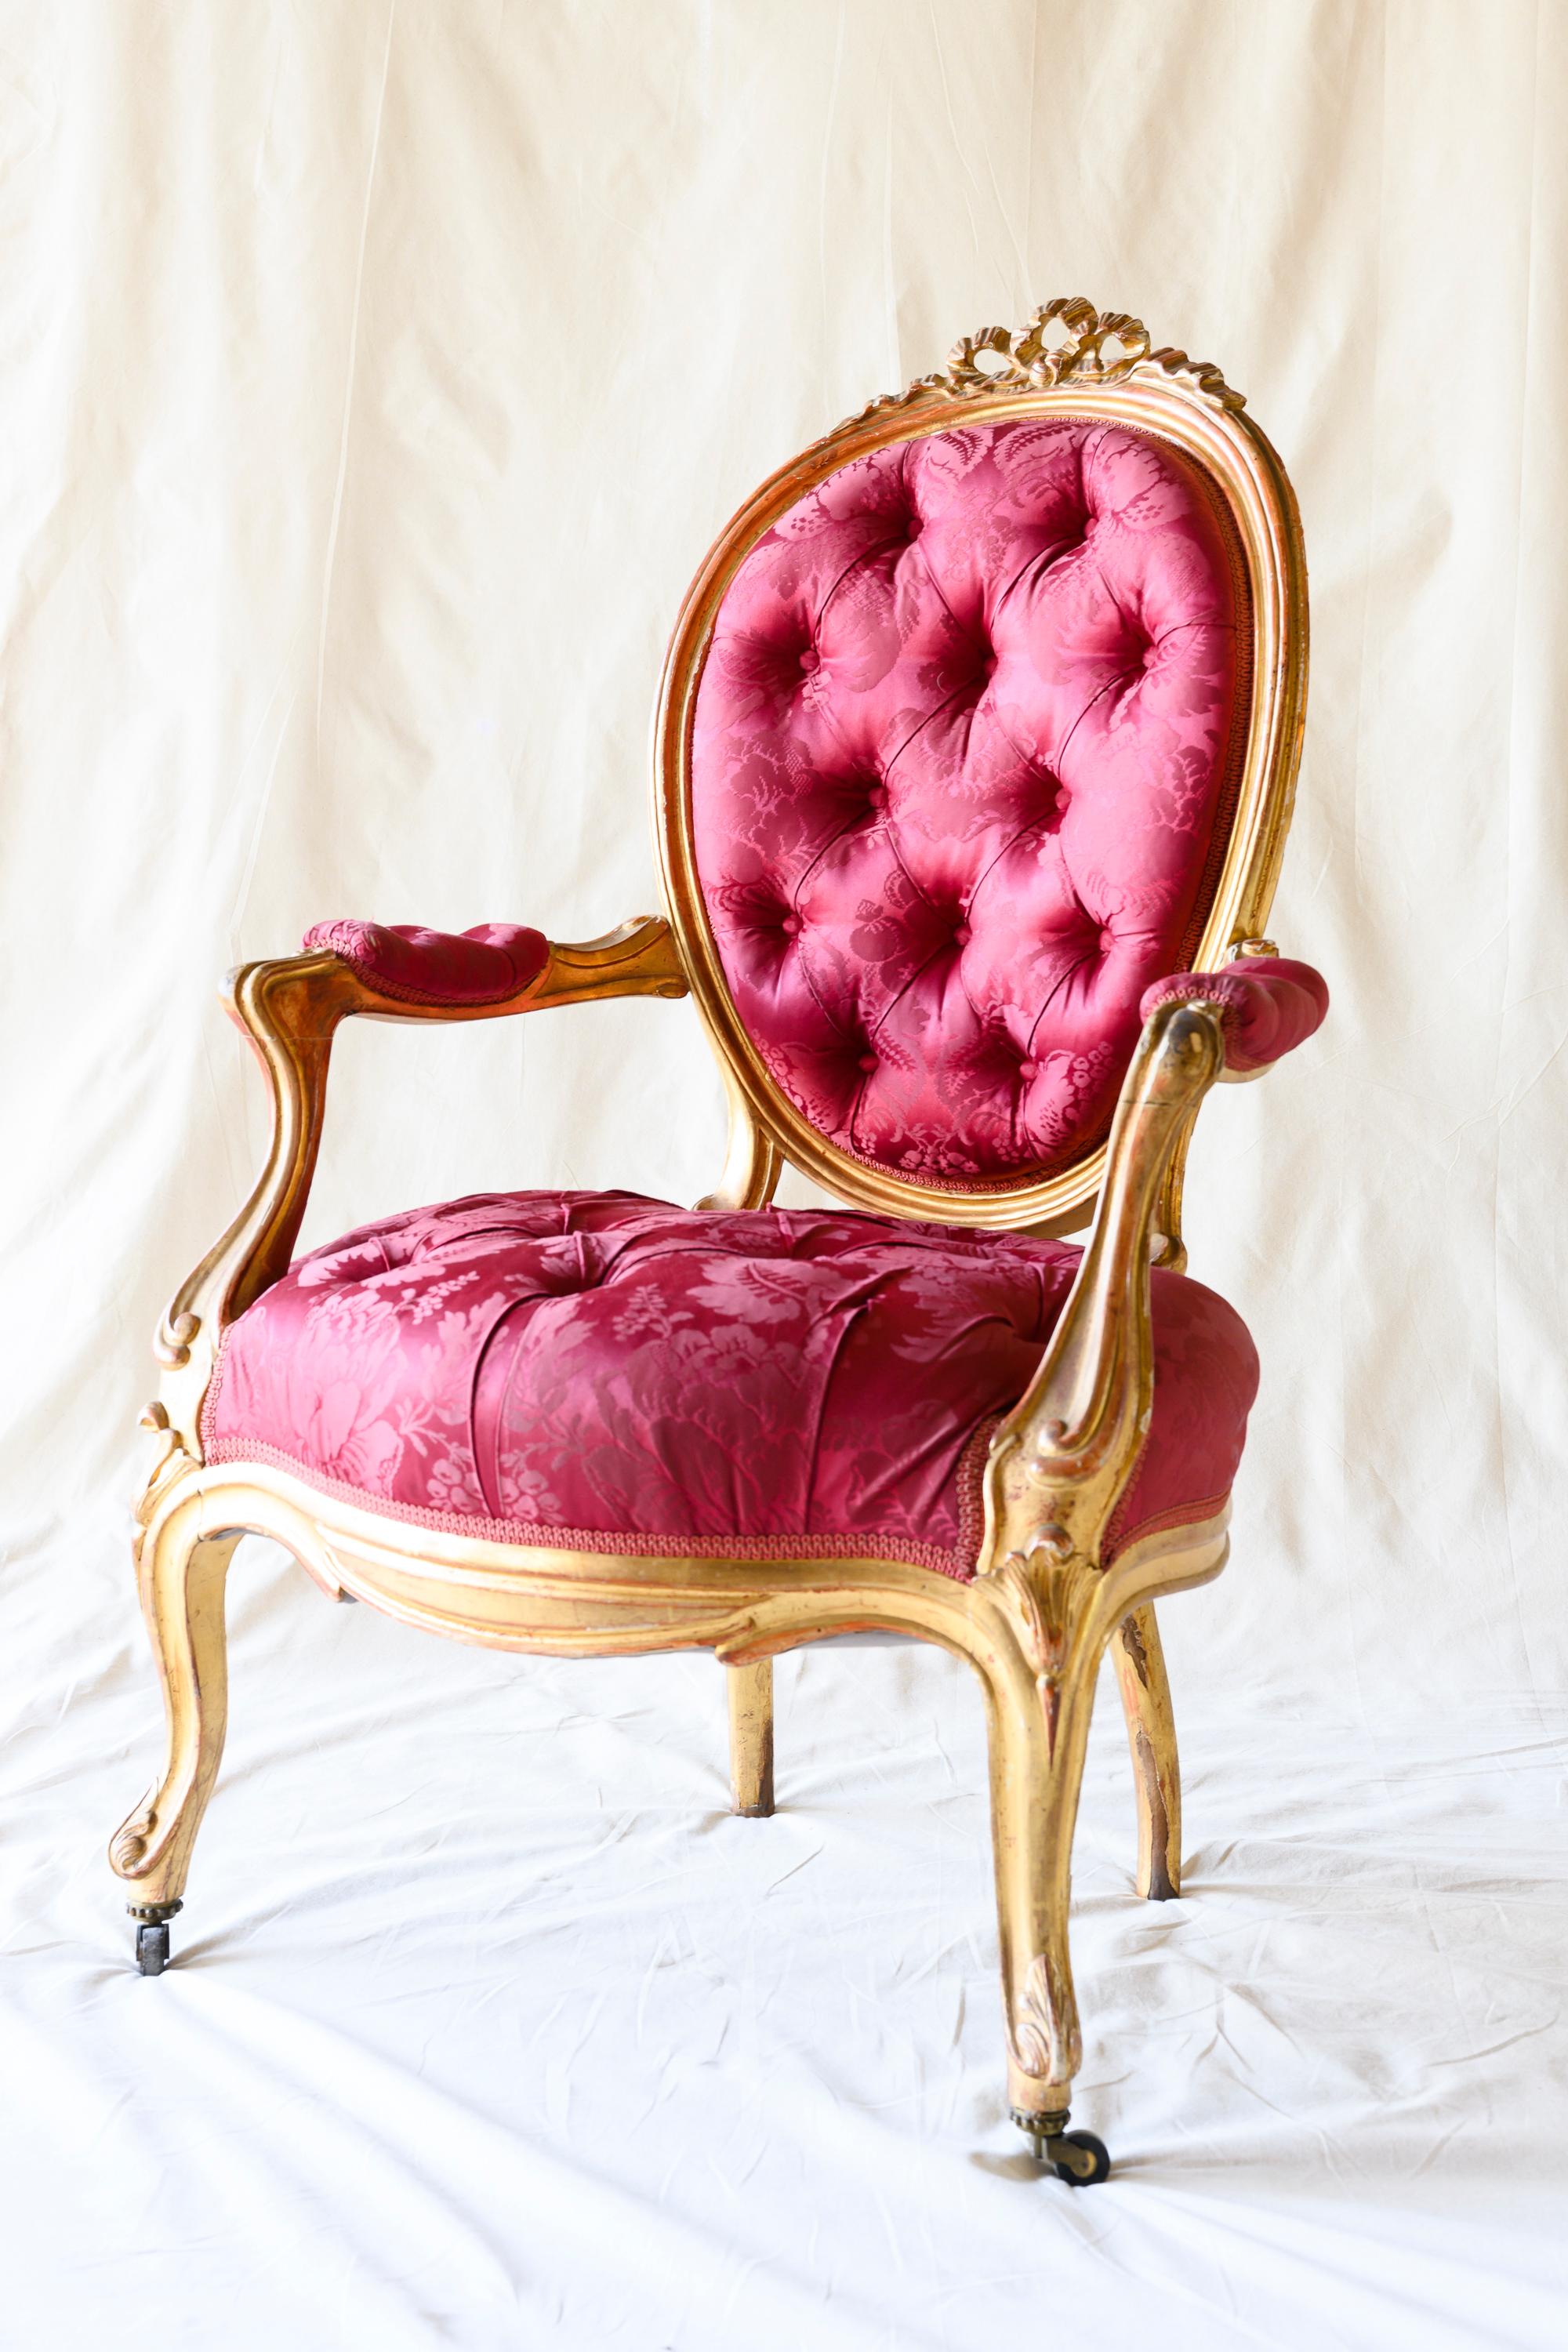 Suite of four Louis XV style giltwood cabriolet armchairs, featuring a comfortable curved round backrest topped by carved ribbons, molded serpentine rails leading to open armrests supported on cabriolet legs, upholstered seat and backrest with